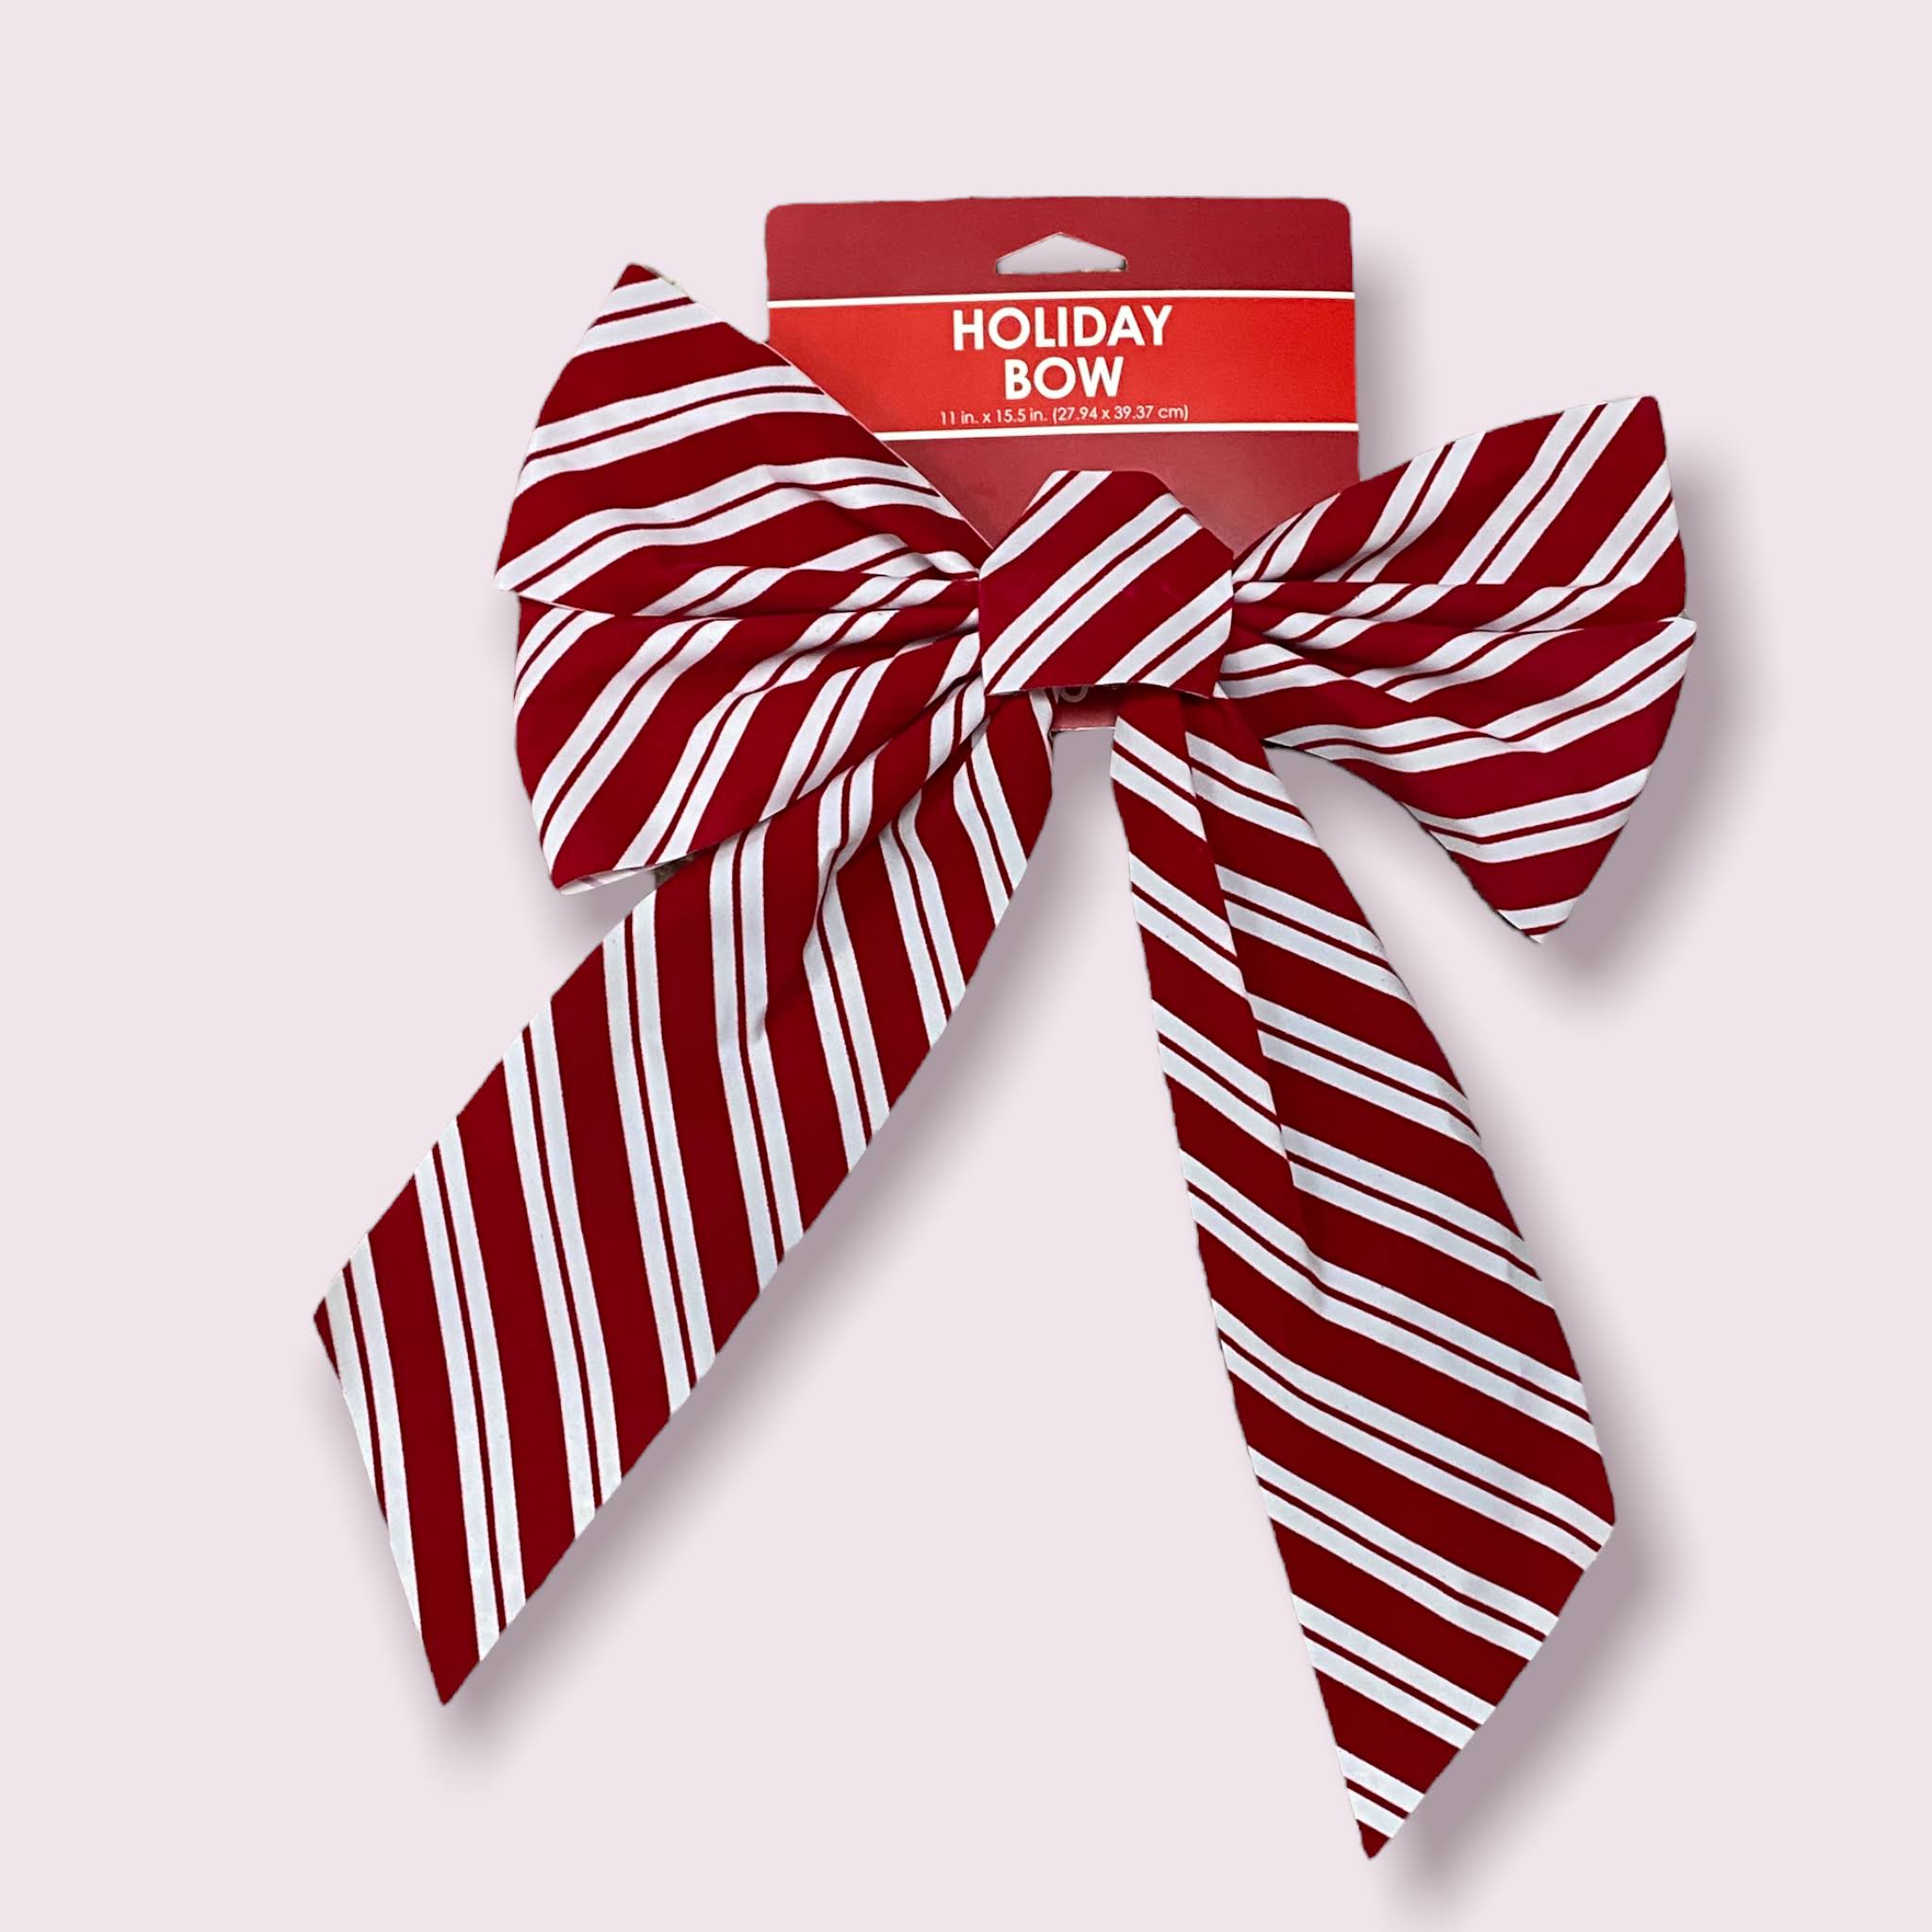 Franklin Square Pharmacy Candy Cane Holiday Bow 1ct